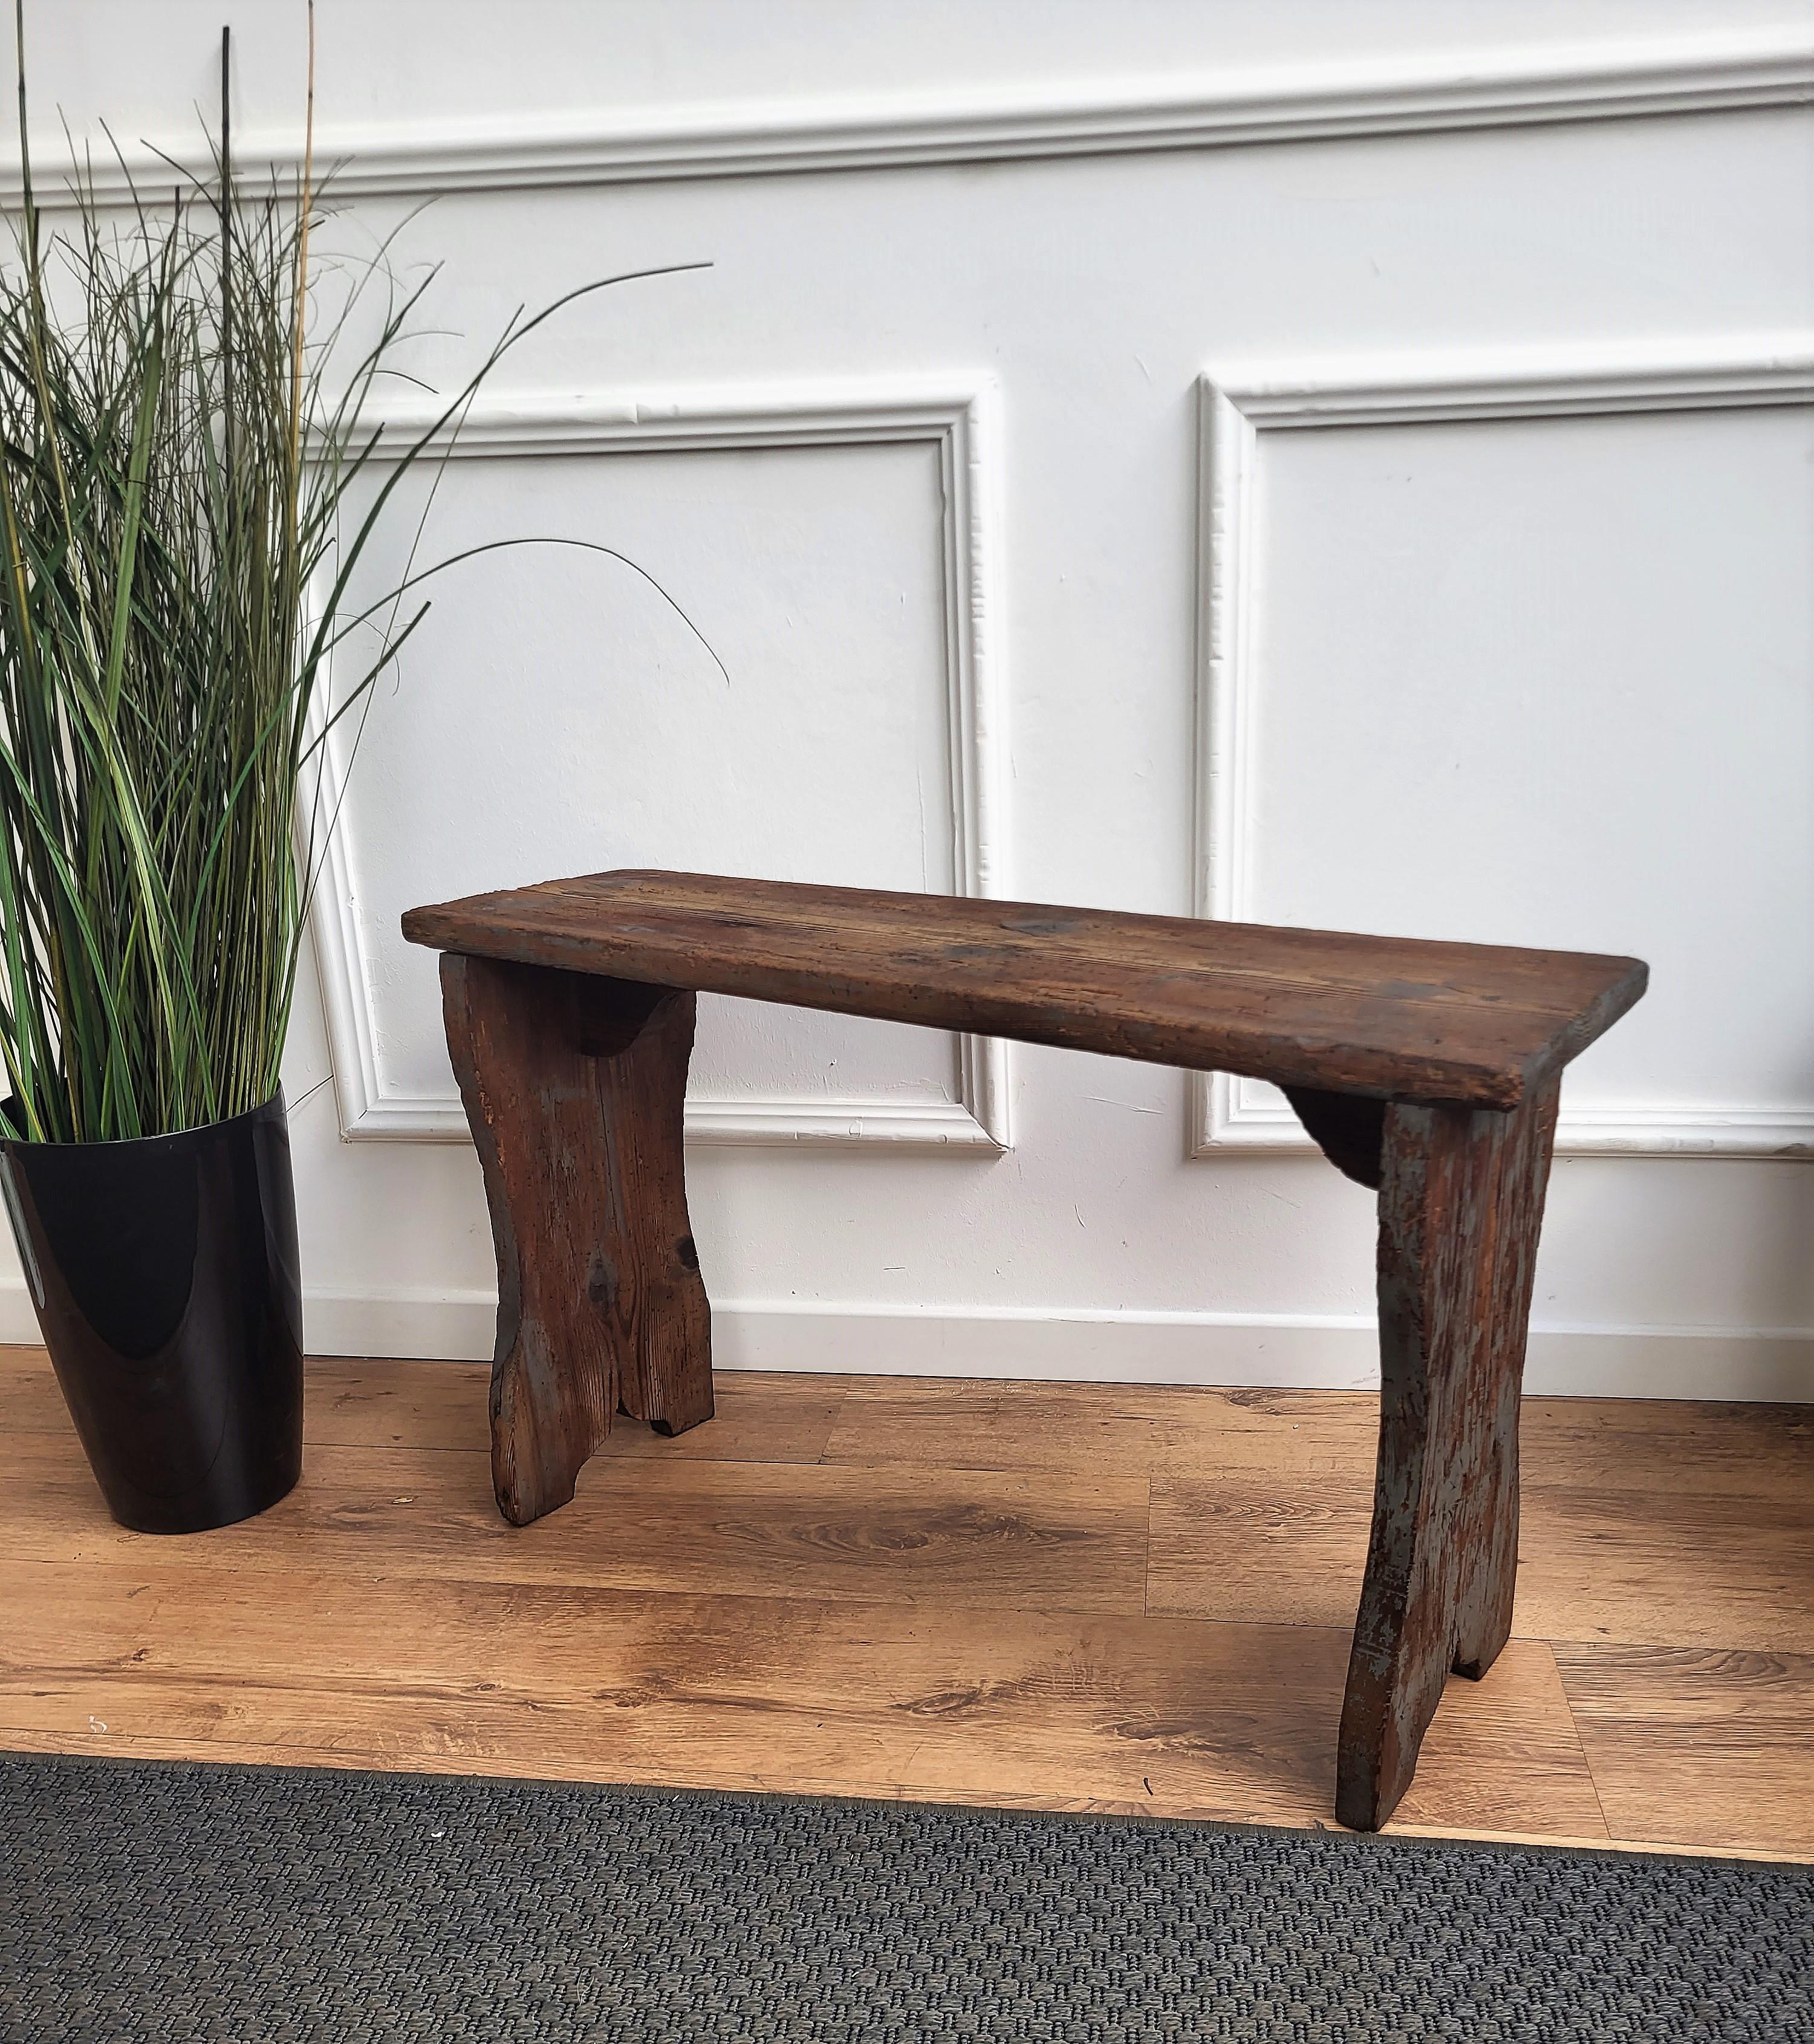 Solid wood construction, beautiful wood grain, distressed finish, very nice antique item with great style and form. In original beautifully aged natural color, it has some old gray paint on legs and top. This piece is in the rustic Primitive spirit